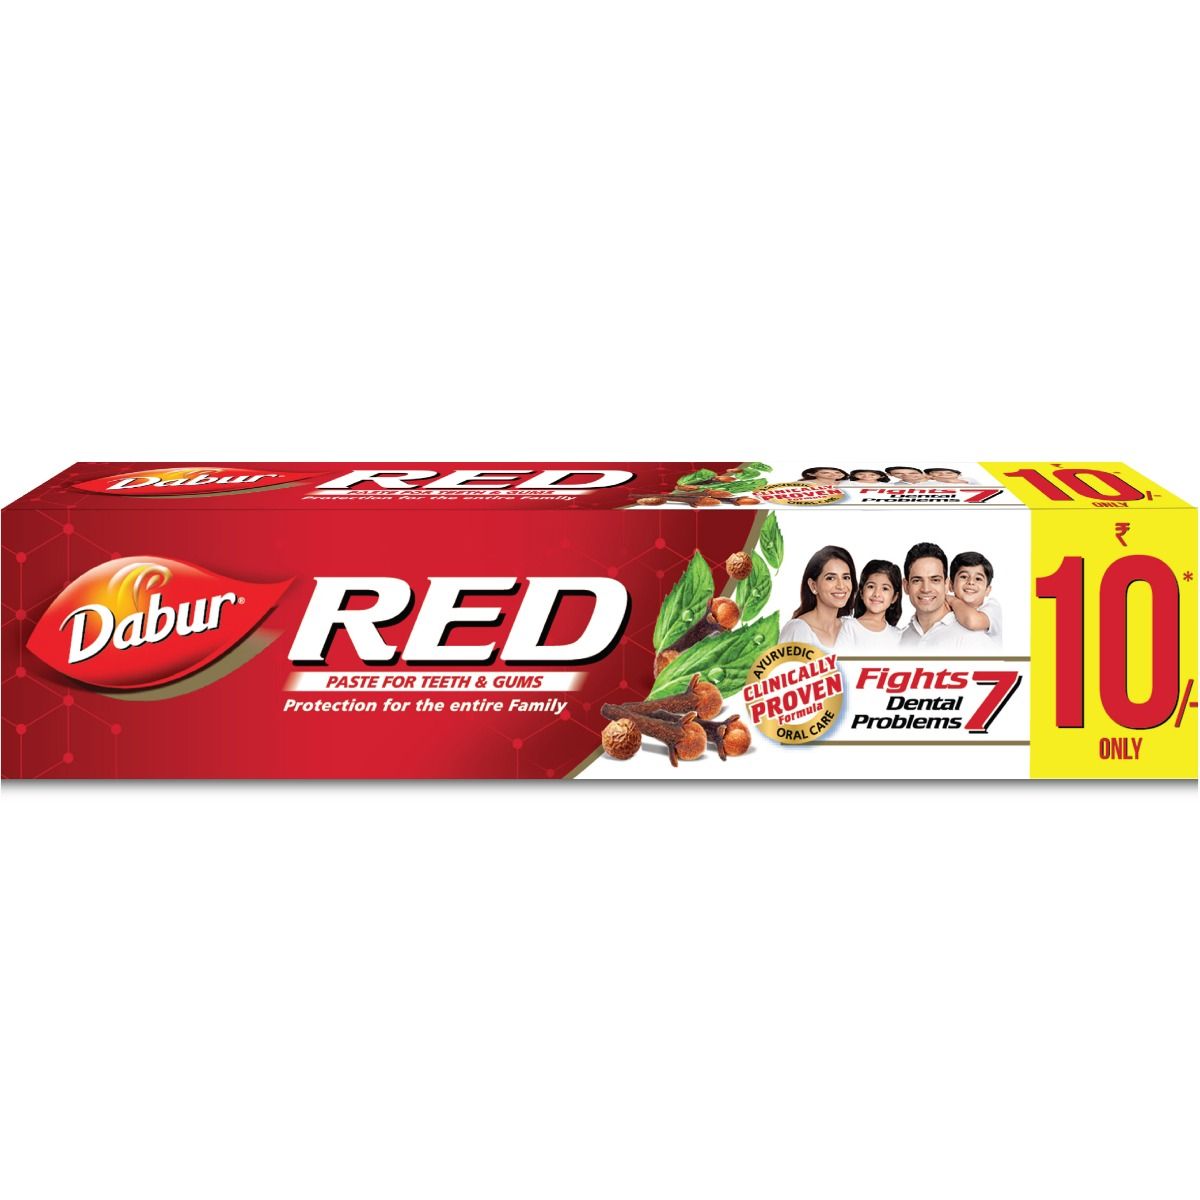 Dabur Red Toothpaste, 20 gm Price, Uses, Side Effects, Composition ...